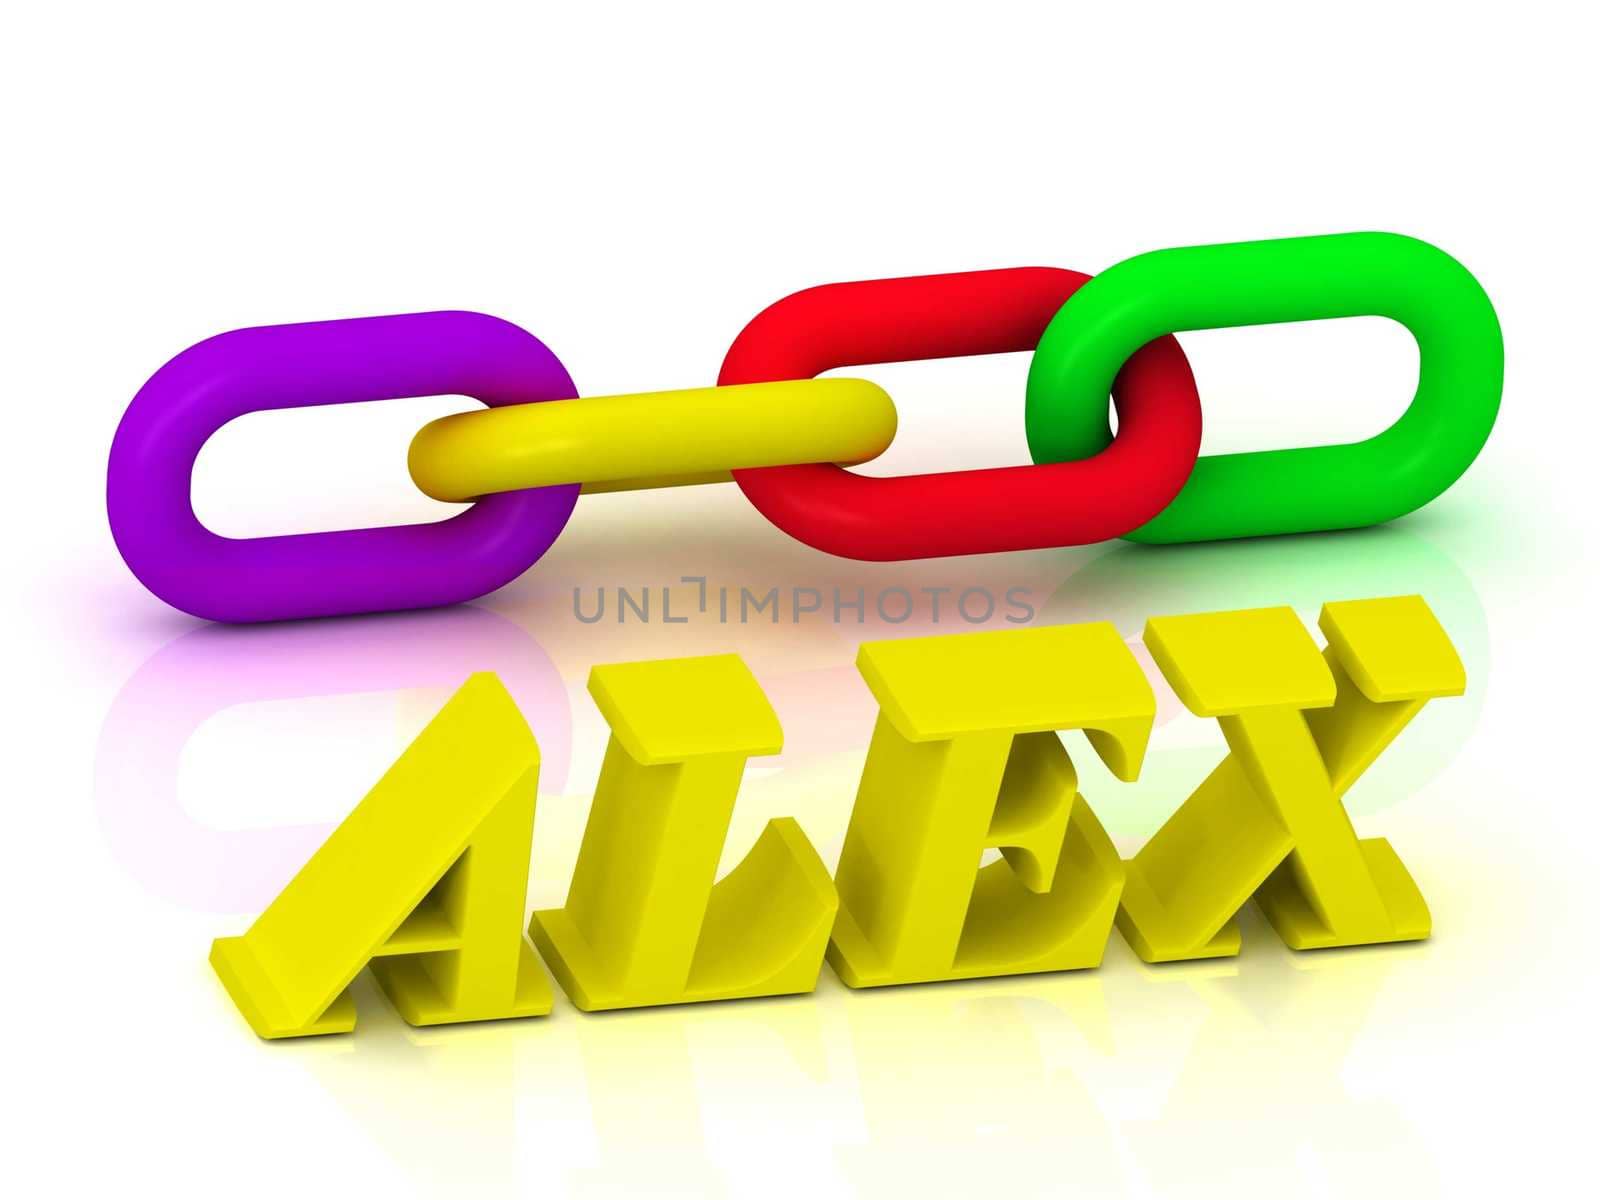 ALEX- Name and Family of bright yellow letters and chain of green, yellow, red section on white background